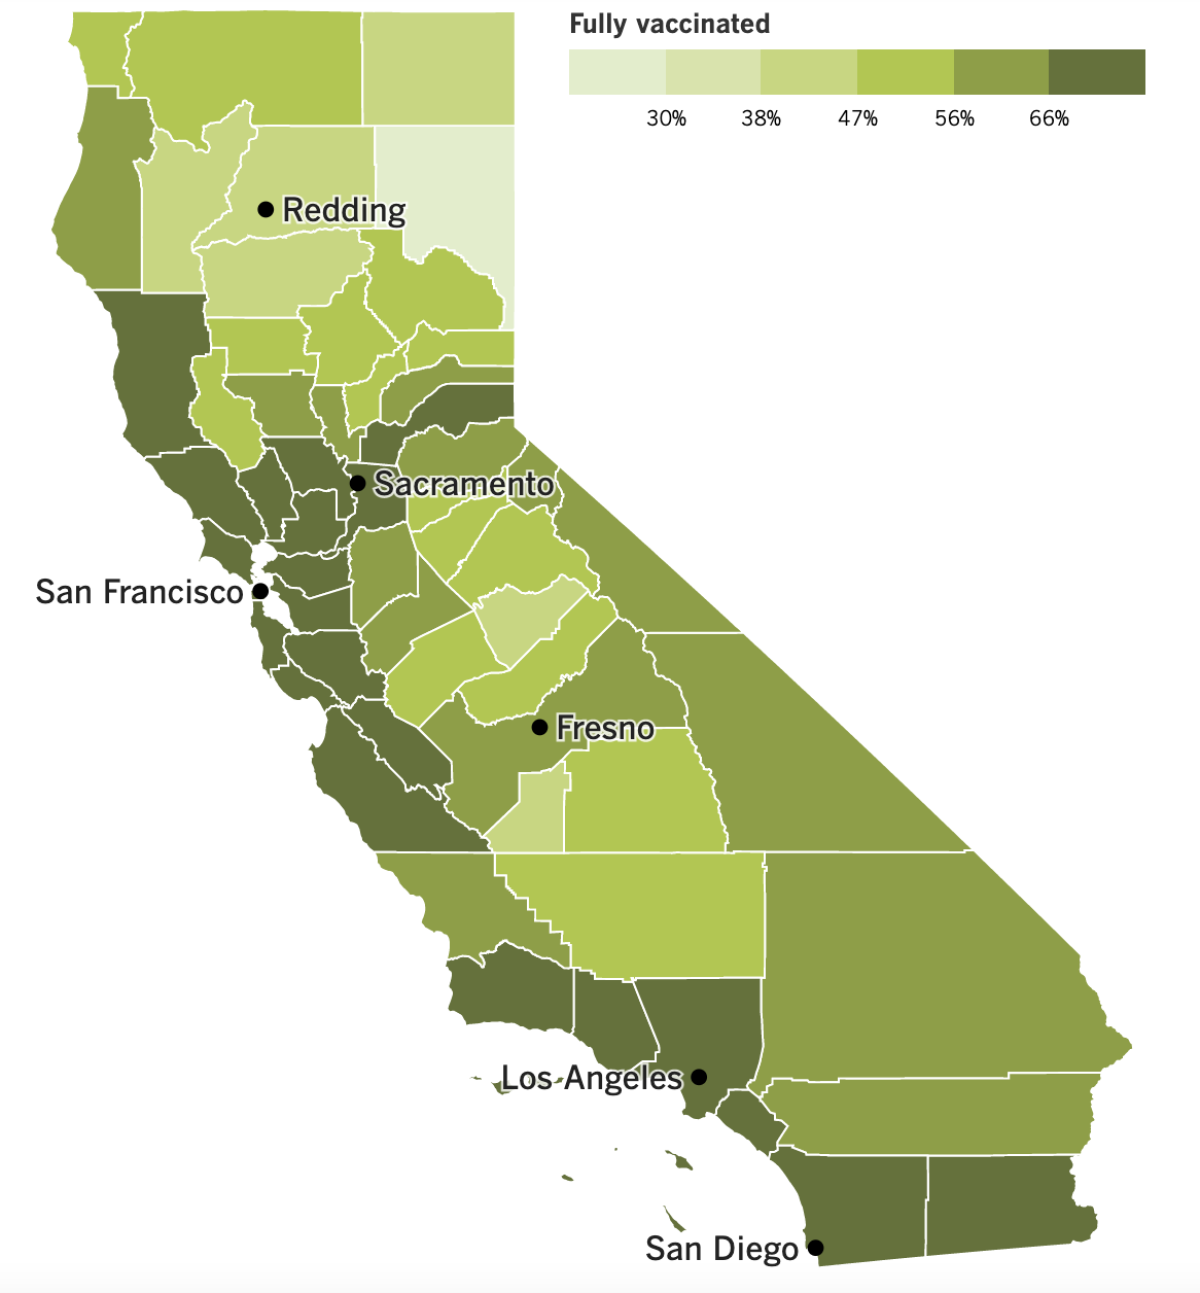 A map that shows California's vaccination progress by county, as of April 5.